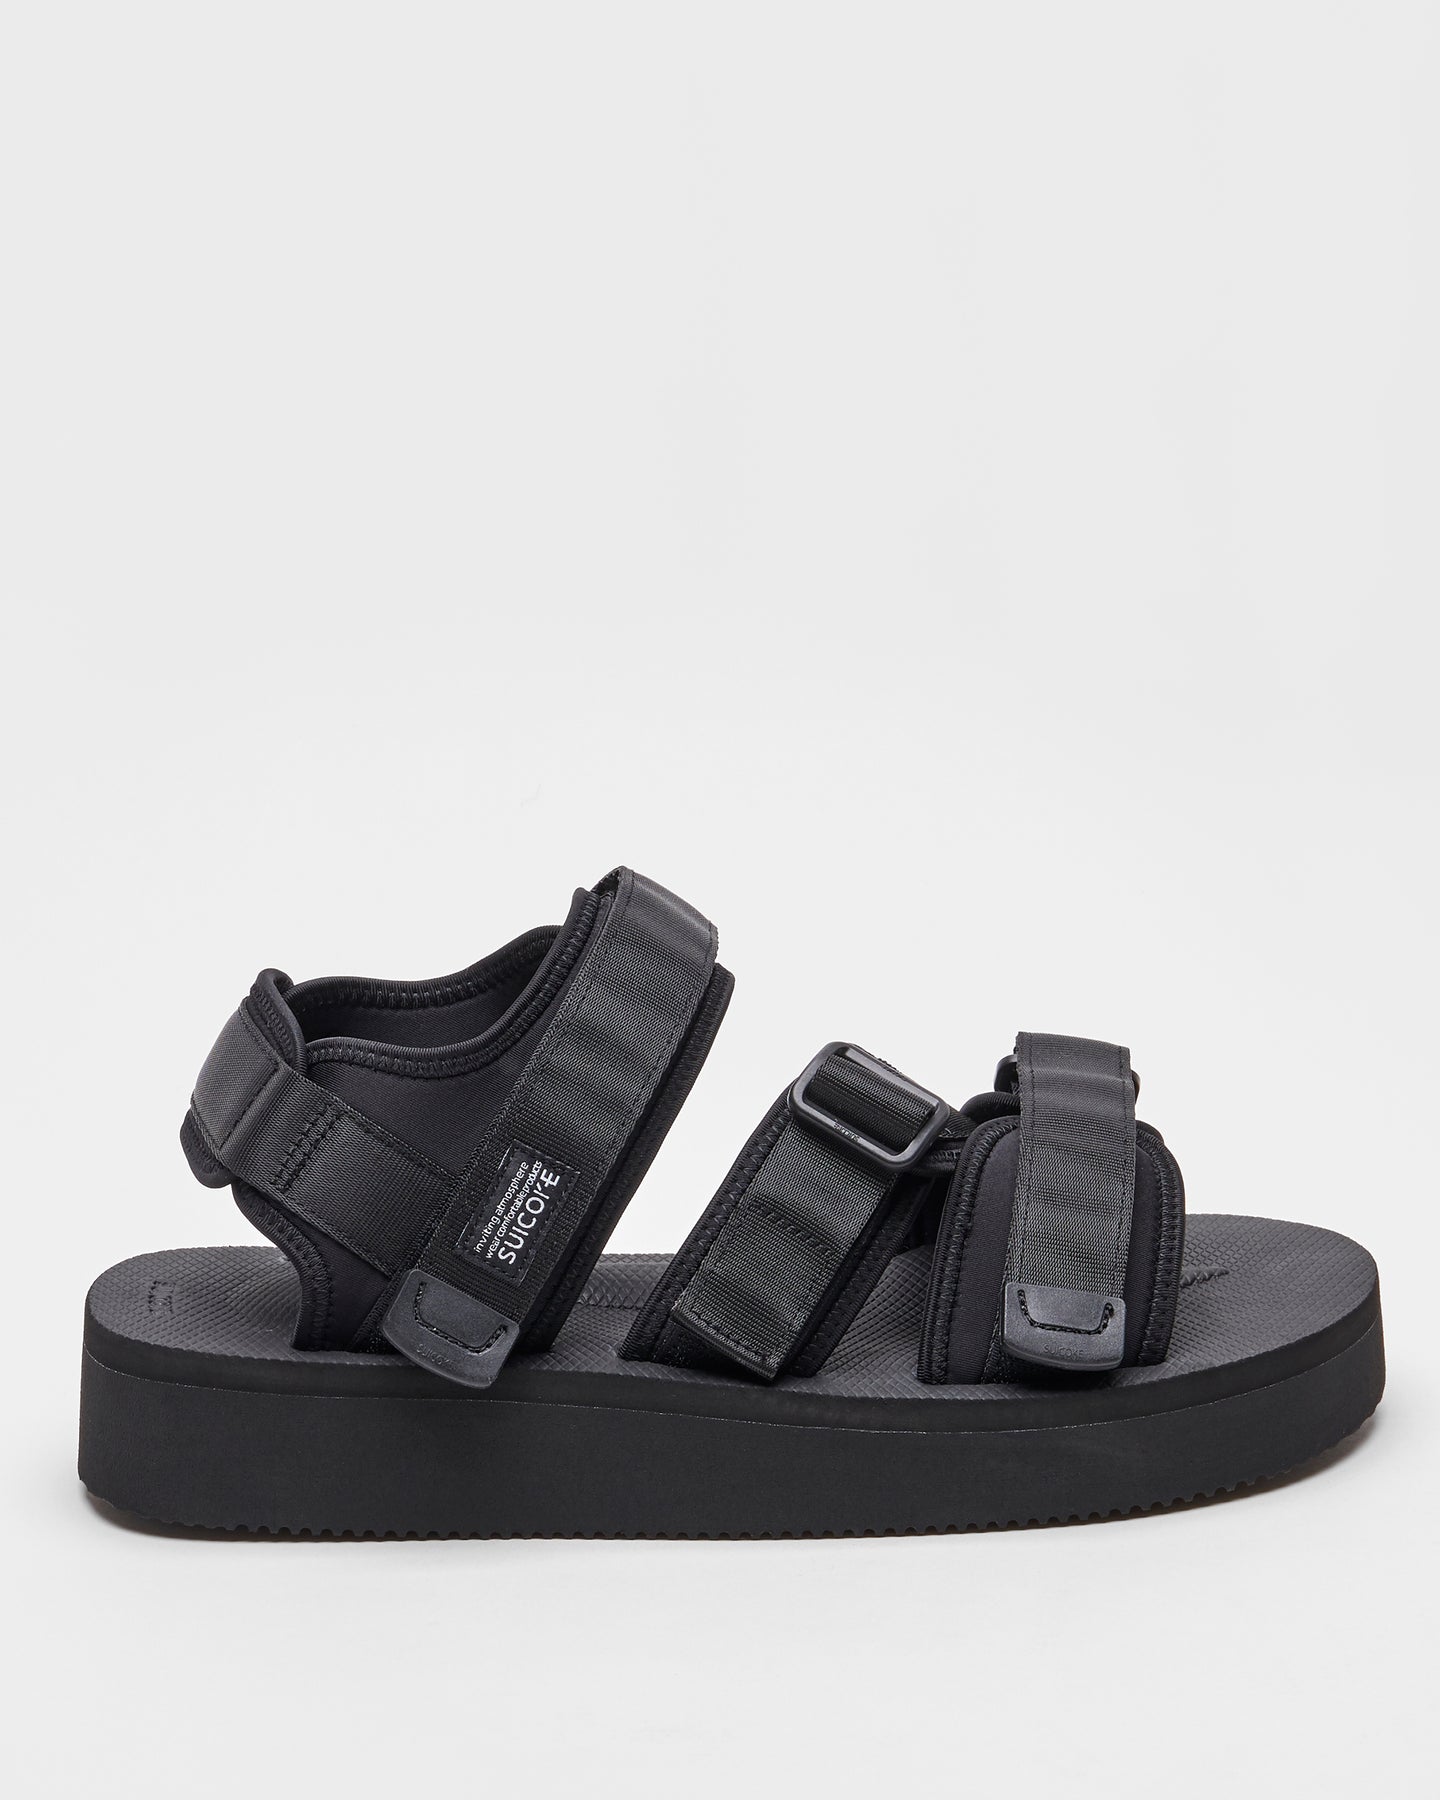 SUICOKE KISEE-PO shoes with black nylon upper, black midsole and sole, straps and logo patch. From Fall/Winter 2023 collection on SUICOKE Official US & Canada Webstore. OG-044PO BLACK